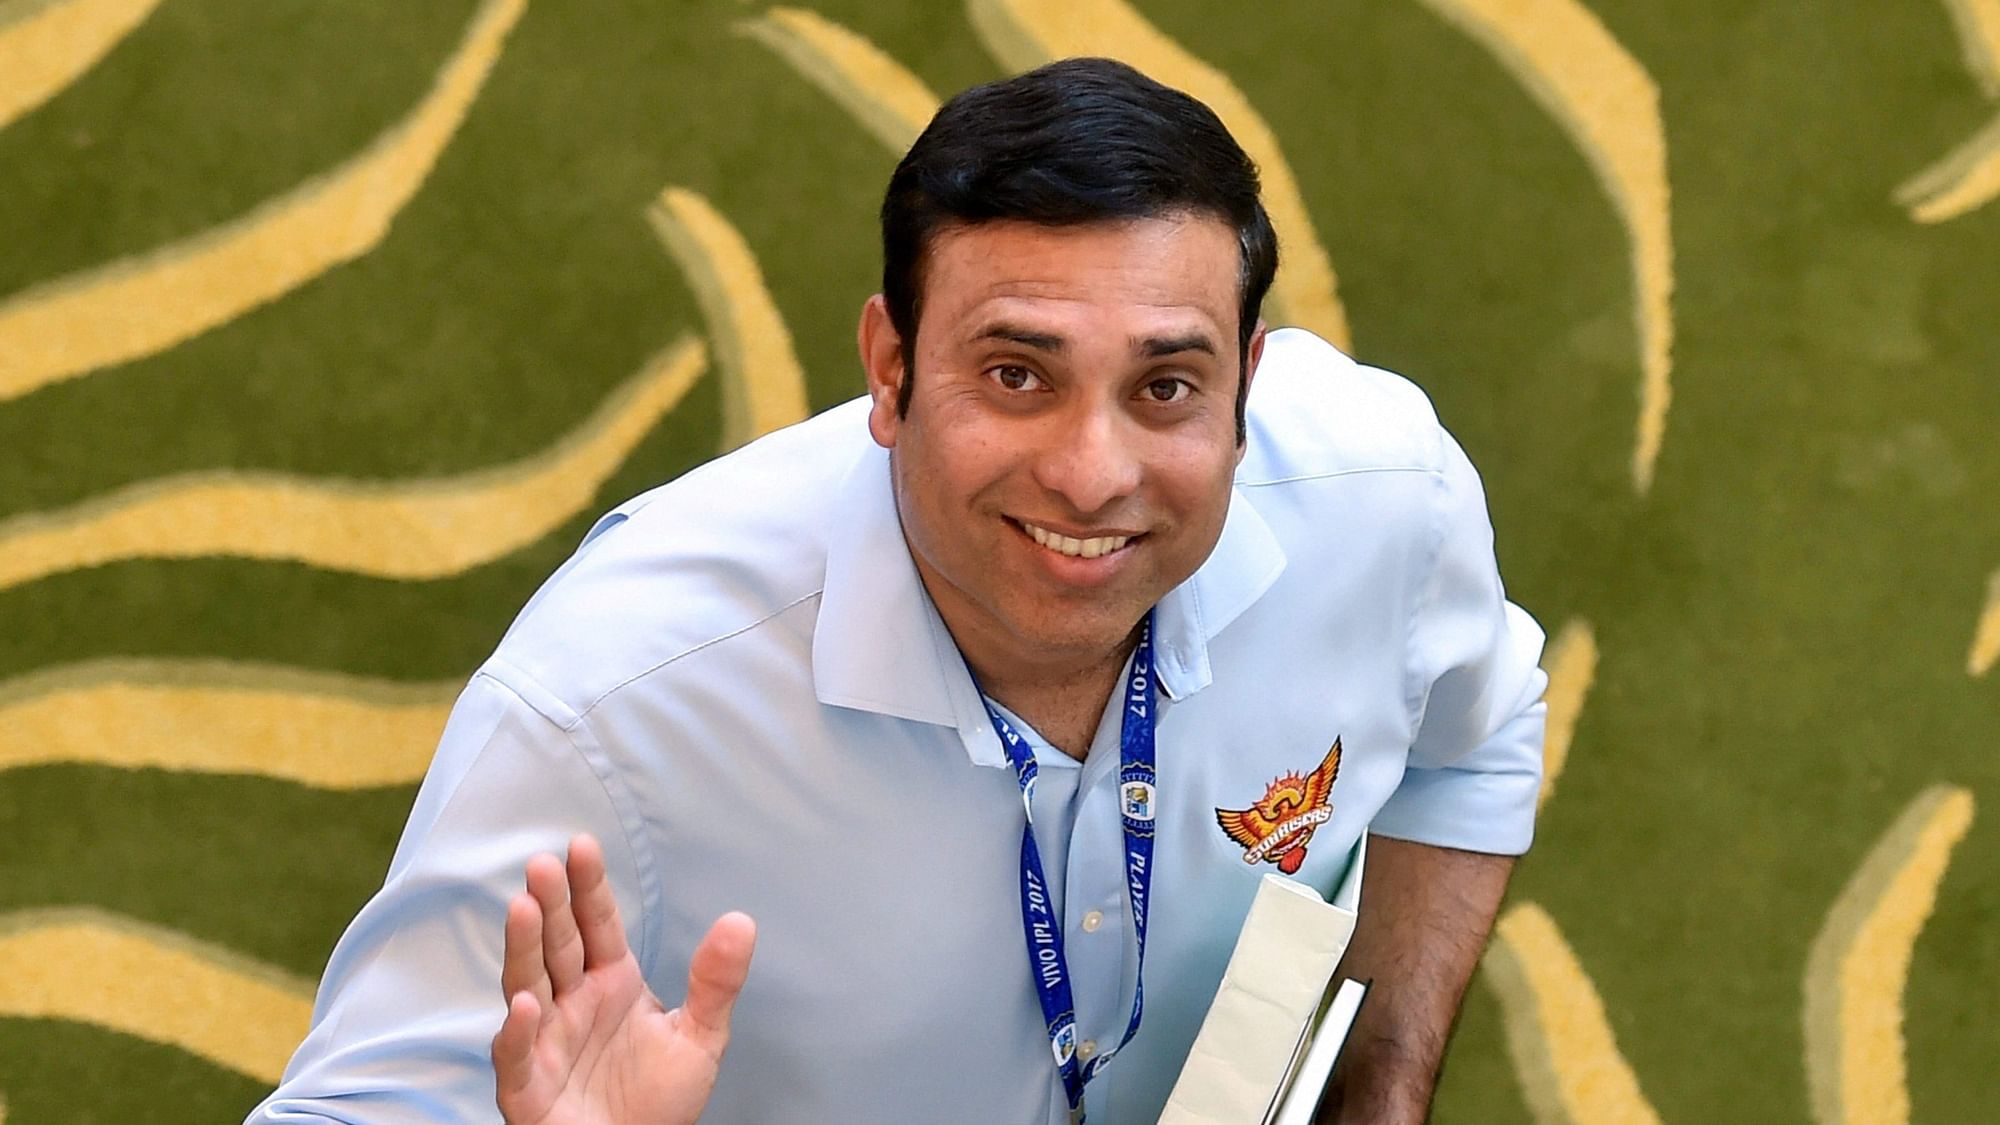 VVS Laxman on Friday paid a tribute to Virender Sehwag, saying the former Indian opener had immense self-belief.